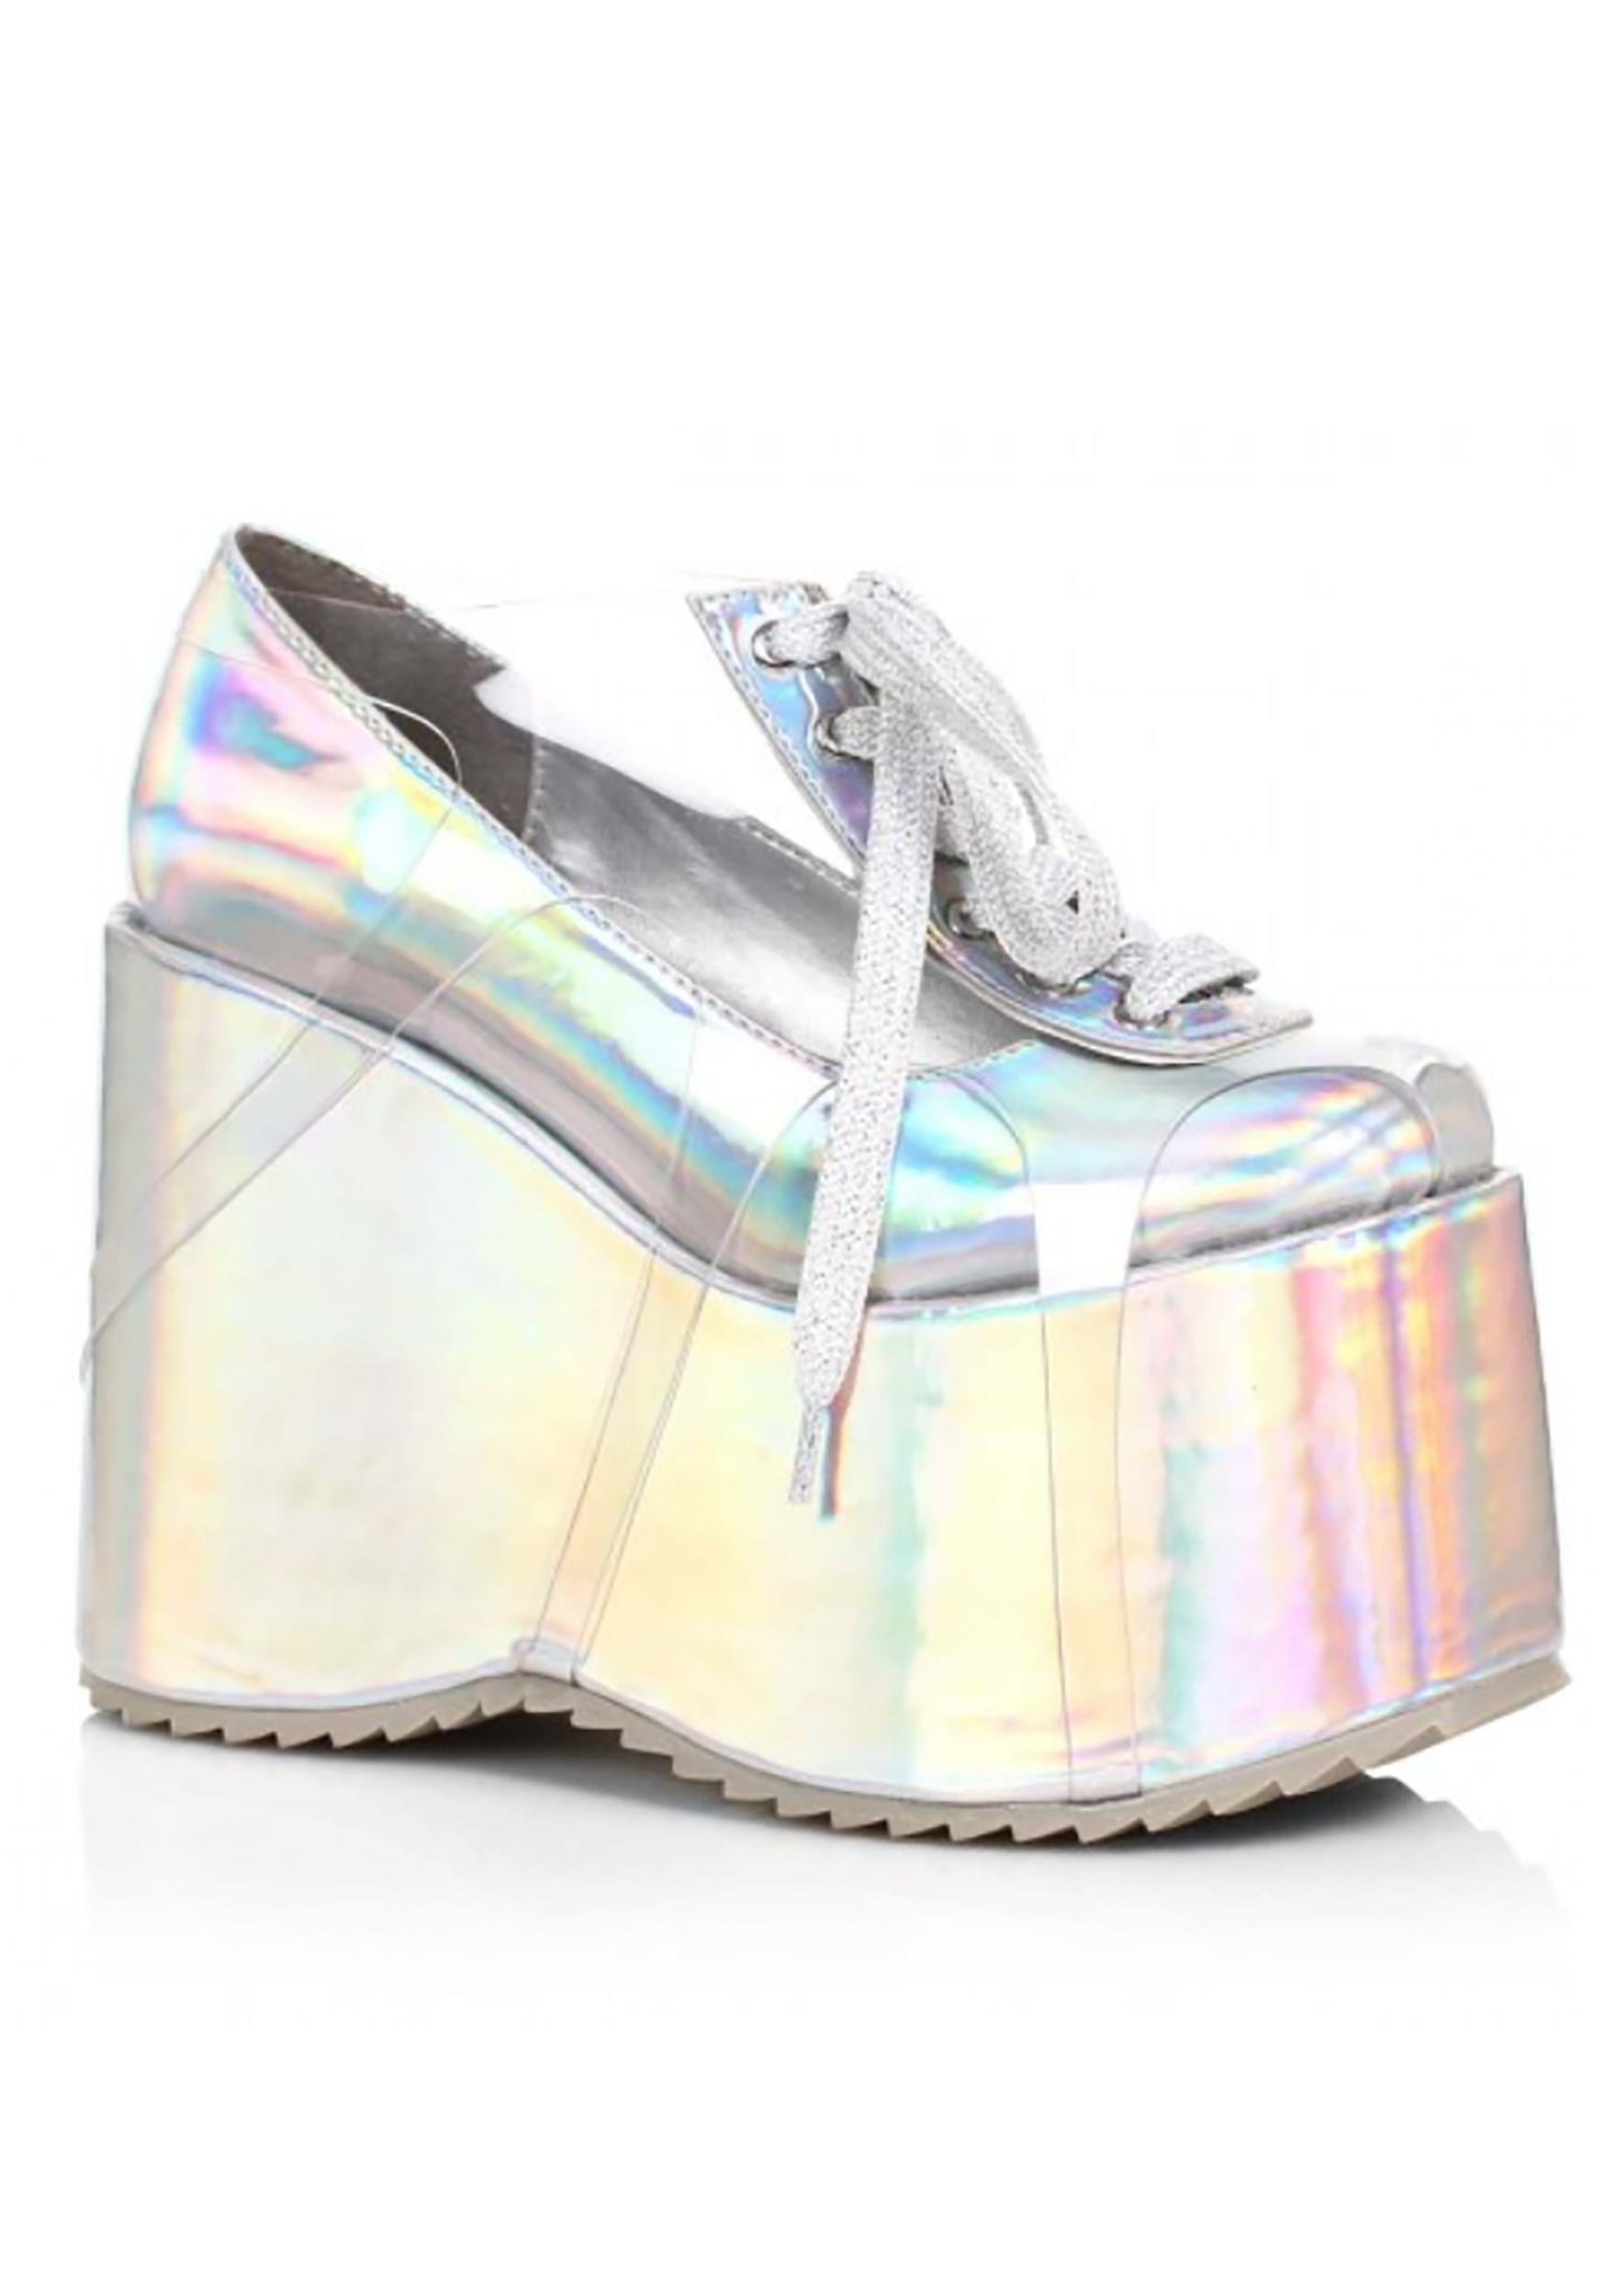 8 Holographic Heels Graphic by UniqueMe · Creative Fabrica